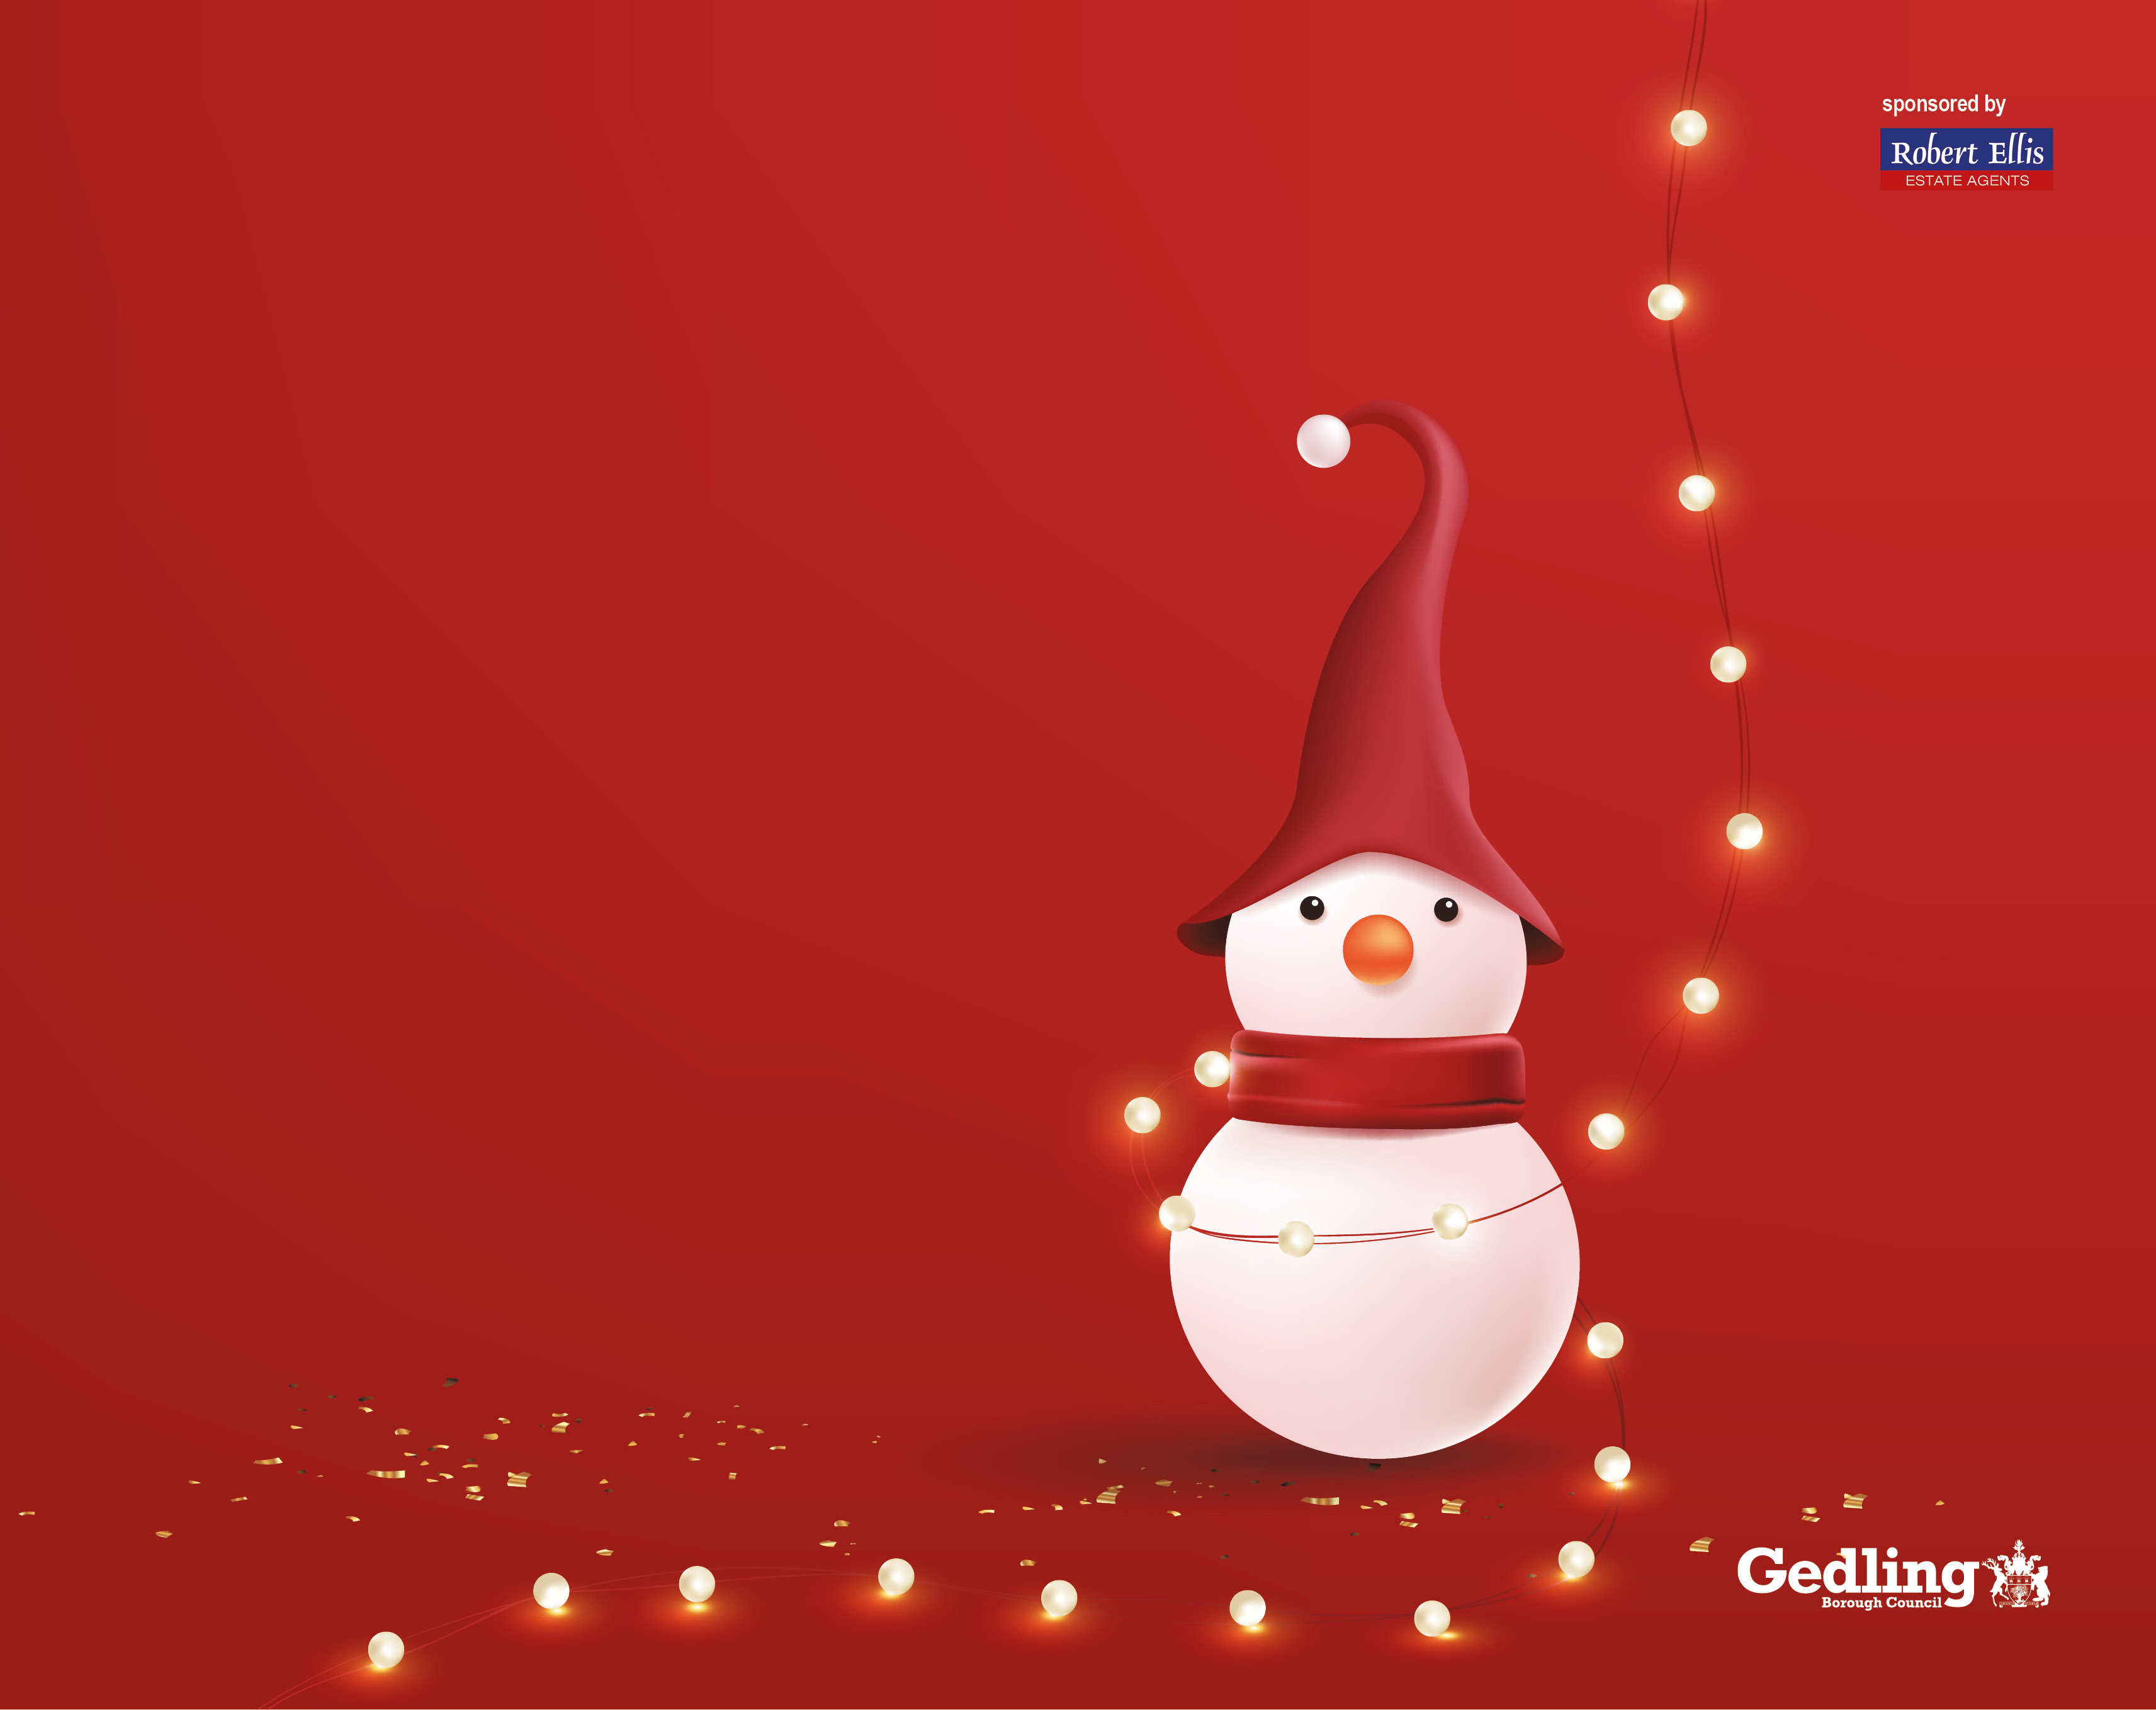 A red background with a snowman wearing a red scarf and hat surrounded by Christmas lights. In the top right corner, text reads 